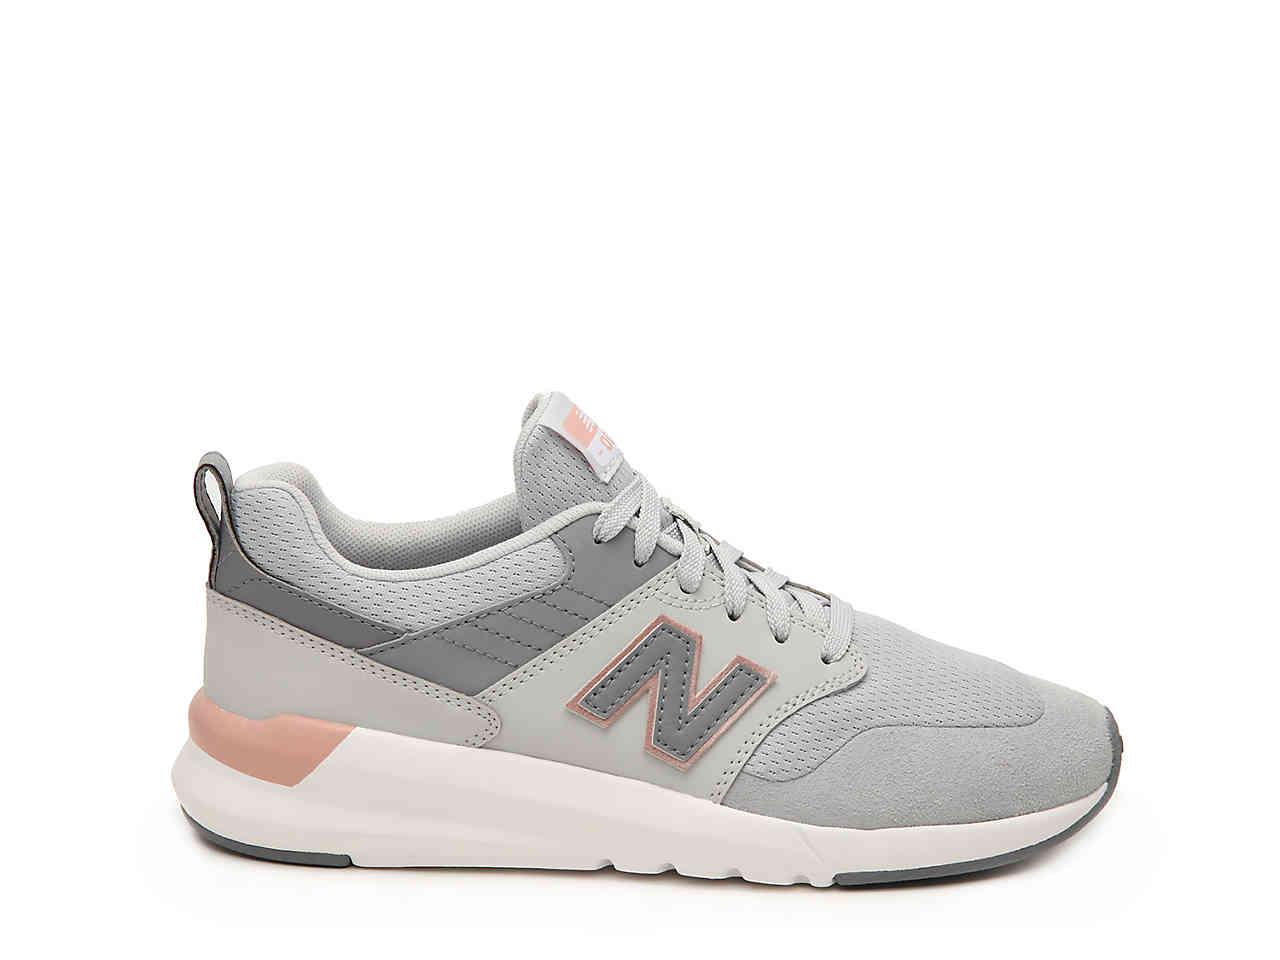 New Balance Synthetic 009 Sneaker in Grey/Mauve Pink (Gray) | Lyst